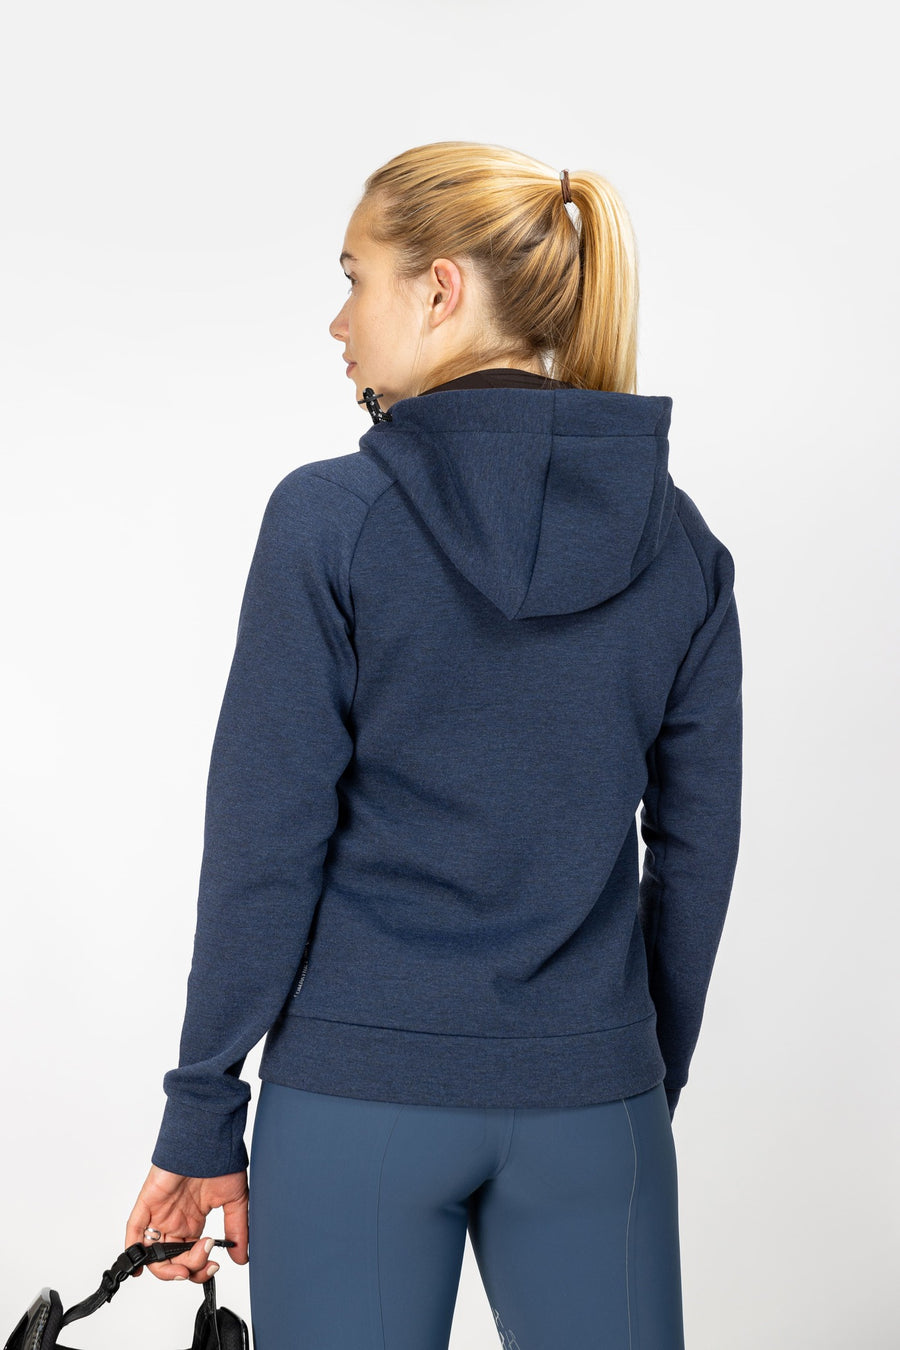 Heather Blue Freejump Women's full zip hoodie with raised neckline and dragonfly emblem on right shoulder